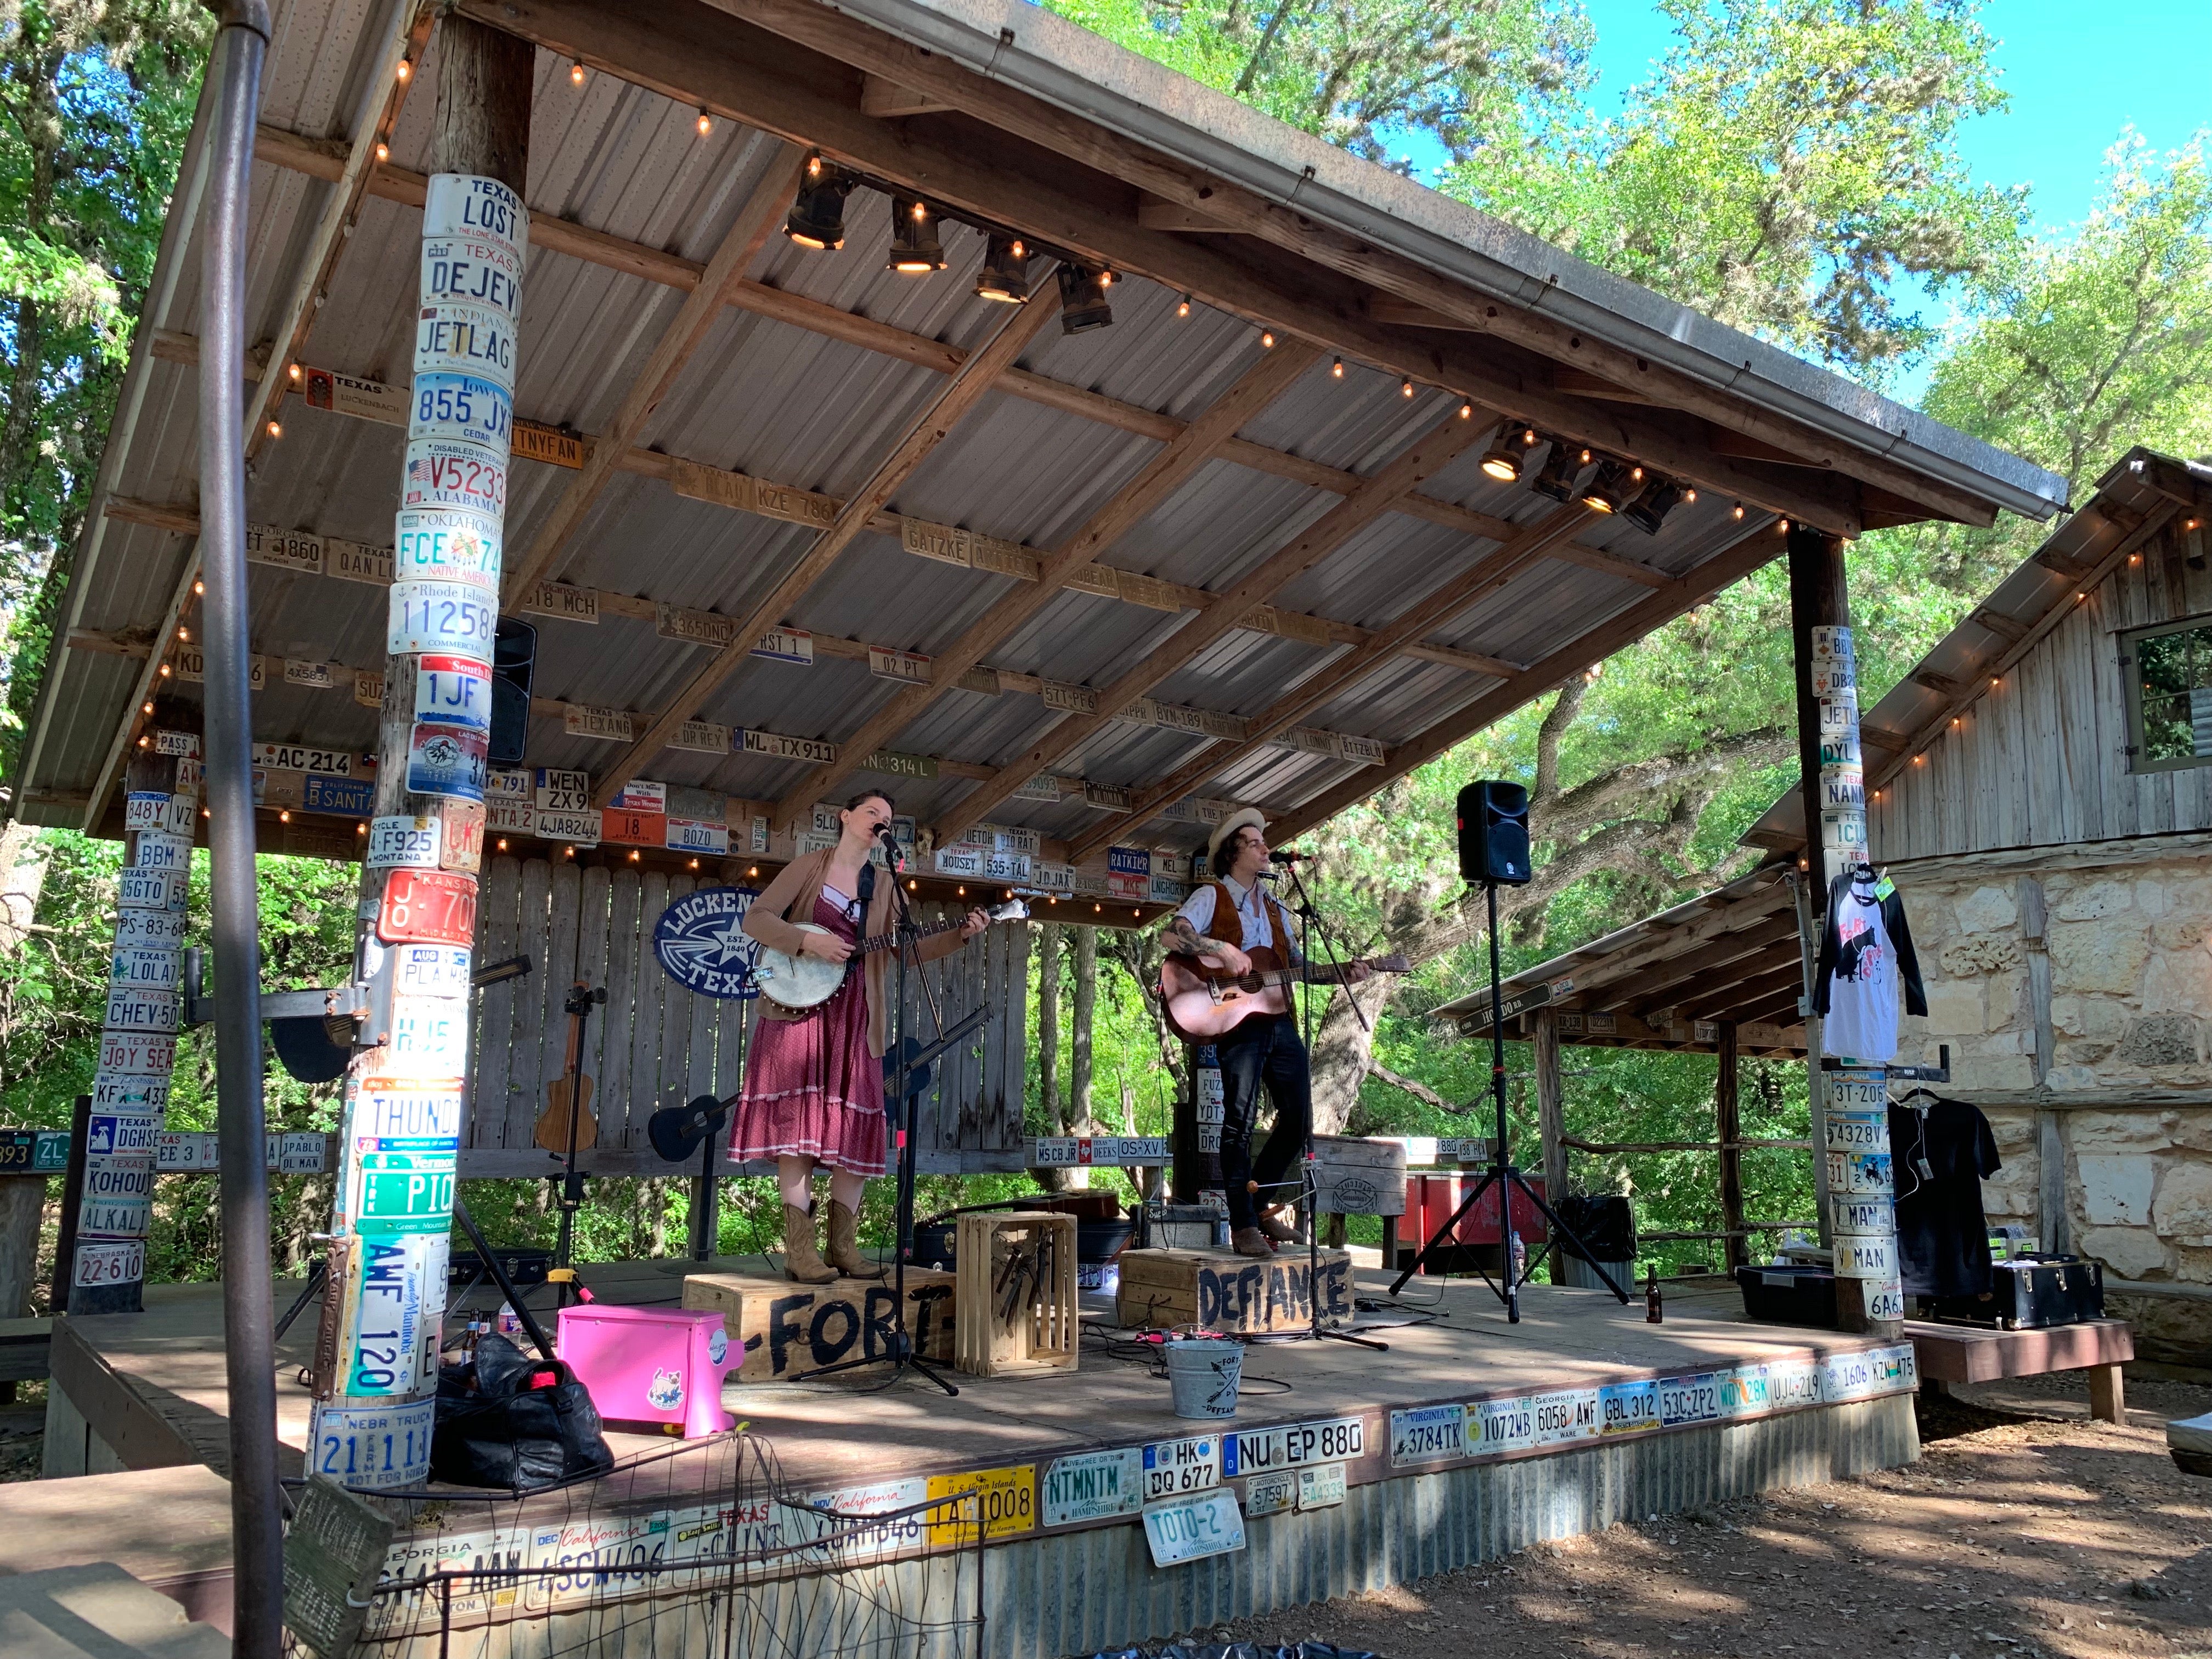 Camper submitted image from Luckenbach Texas Dance Hall - 2